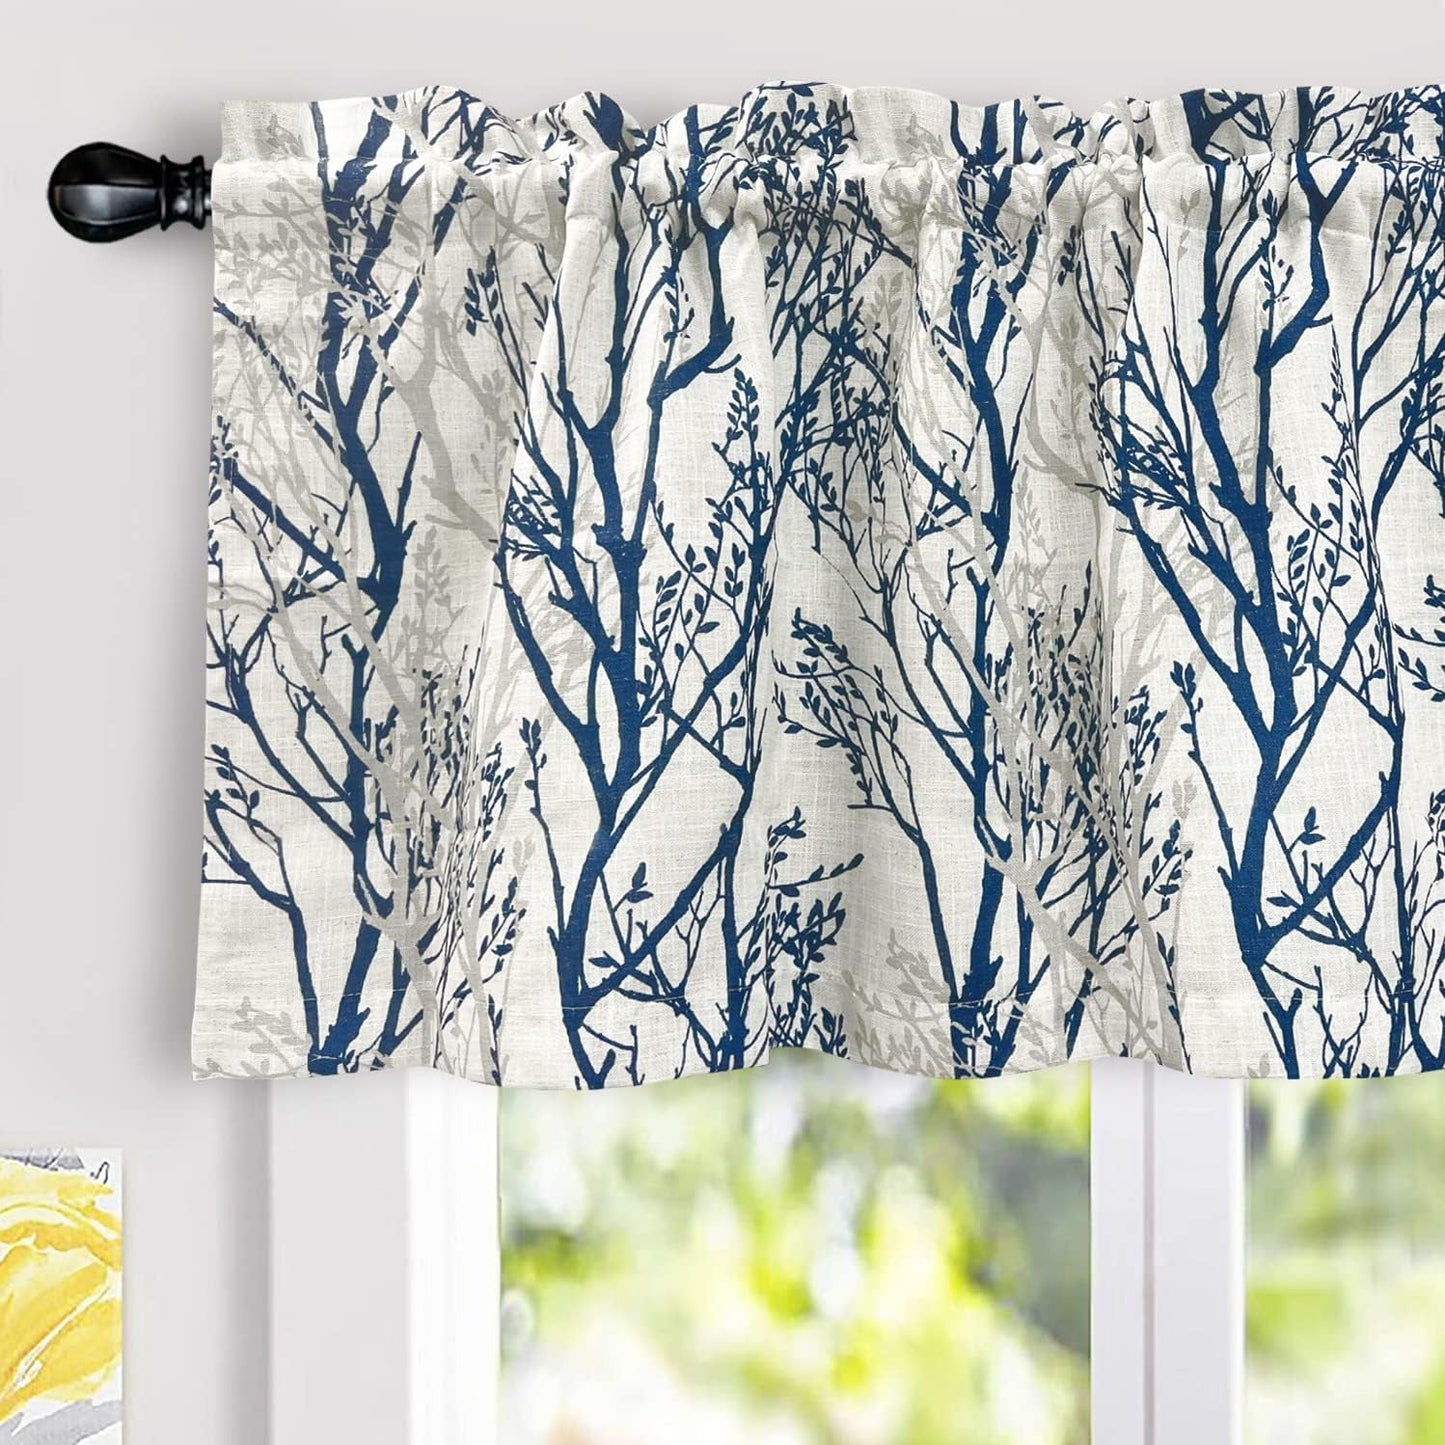 Driftaway Tree Branch Linen Blend Abstract Ink Printing Lined Thermal Insulated Window Linen Curtain Valance Rod Pocket 52 Inch by 18 Inch plus 2 Inch Header Gray